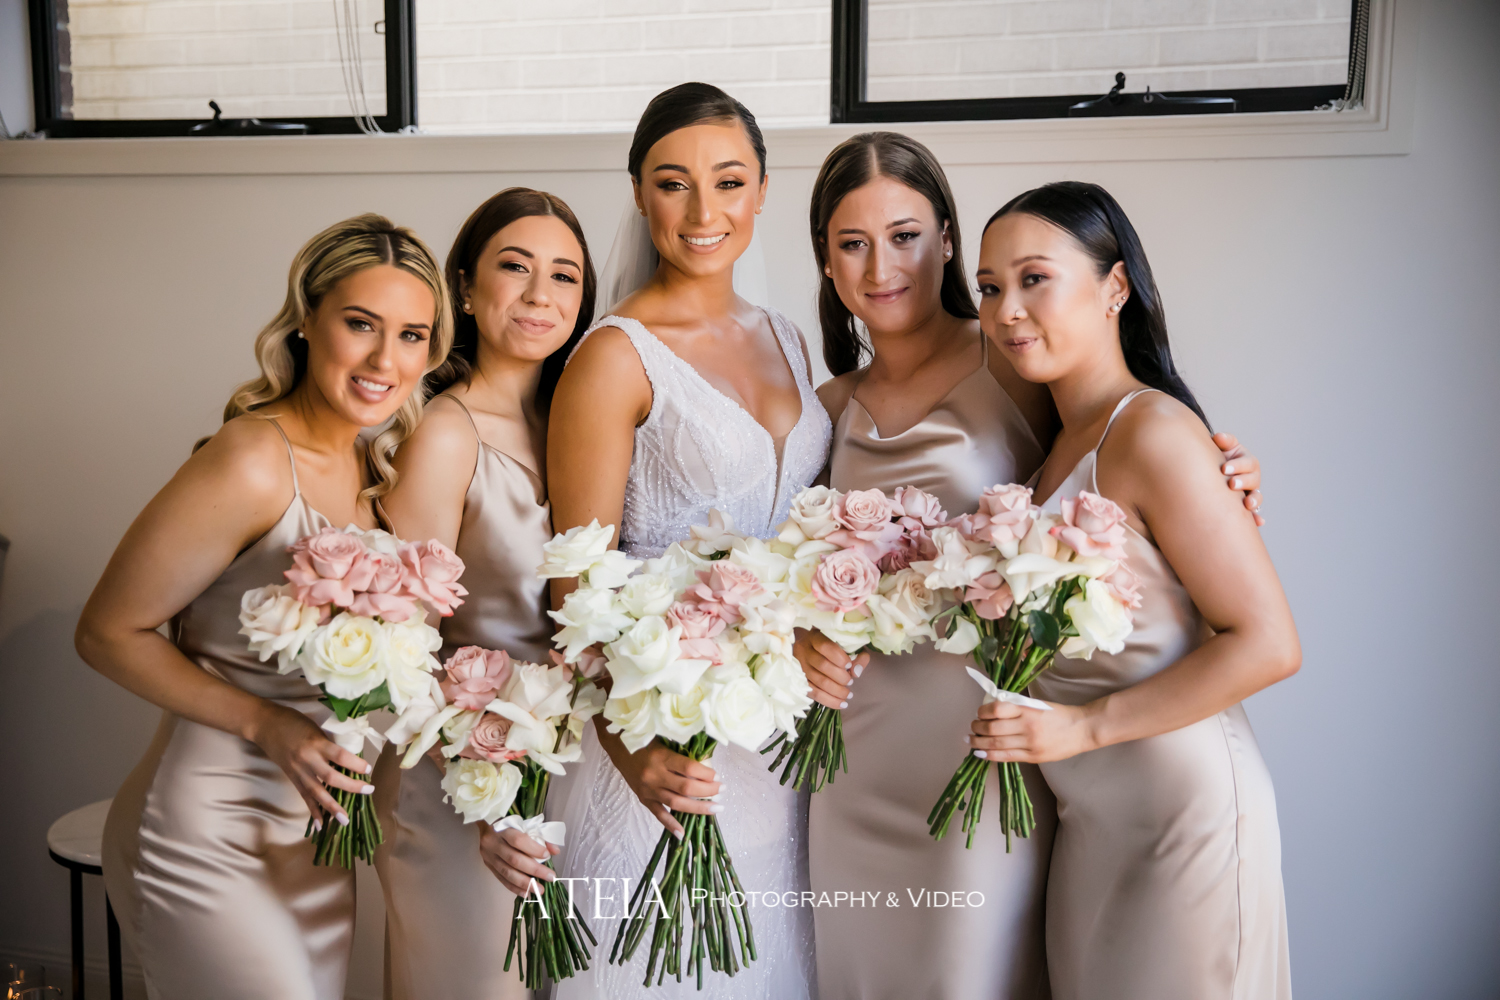 , Crown Casion Aviary Wedding Photography Melbourne by ATEIA Photography